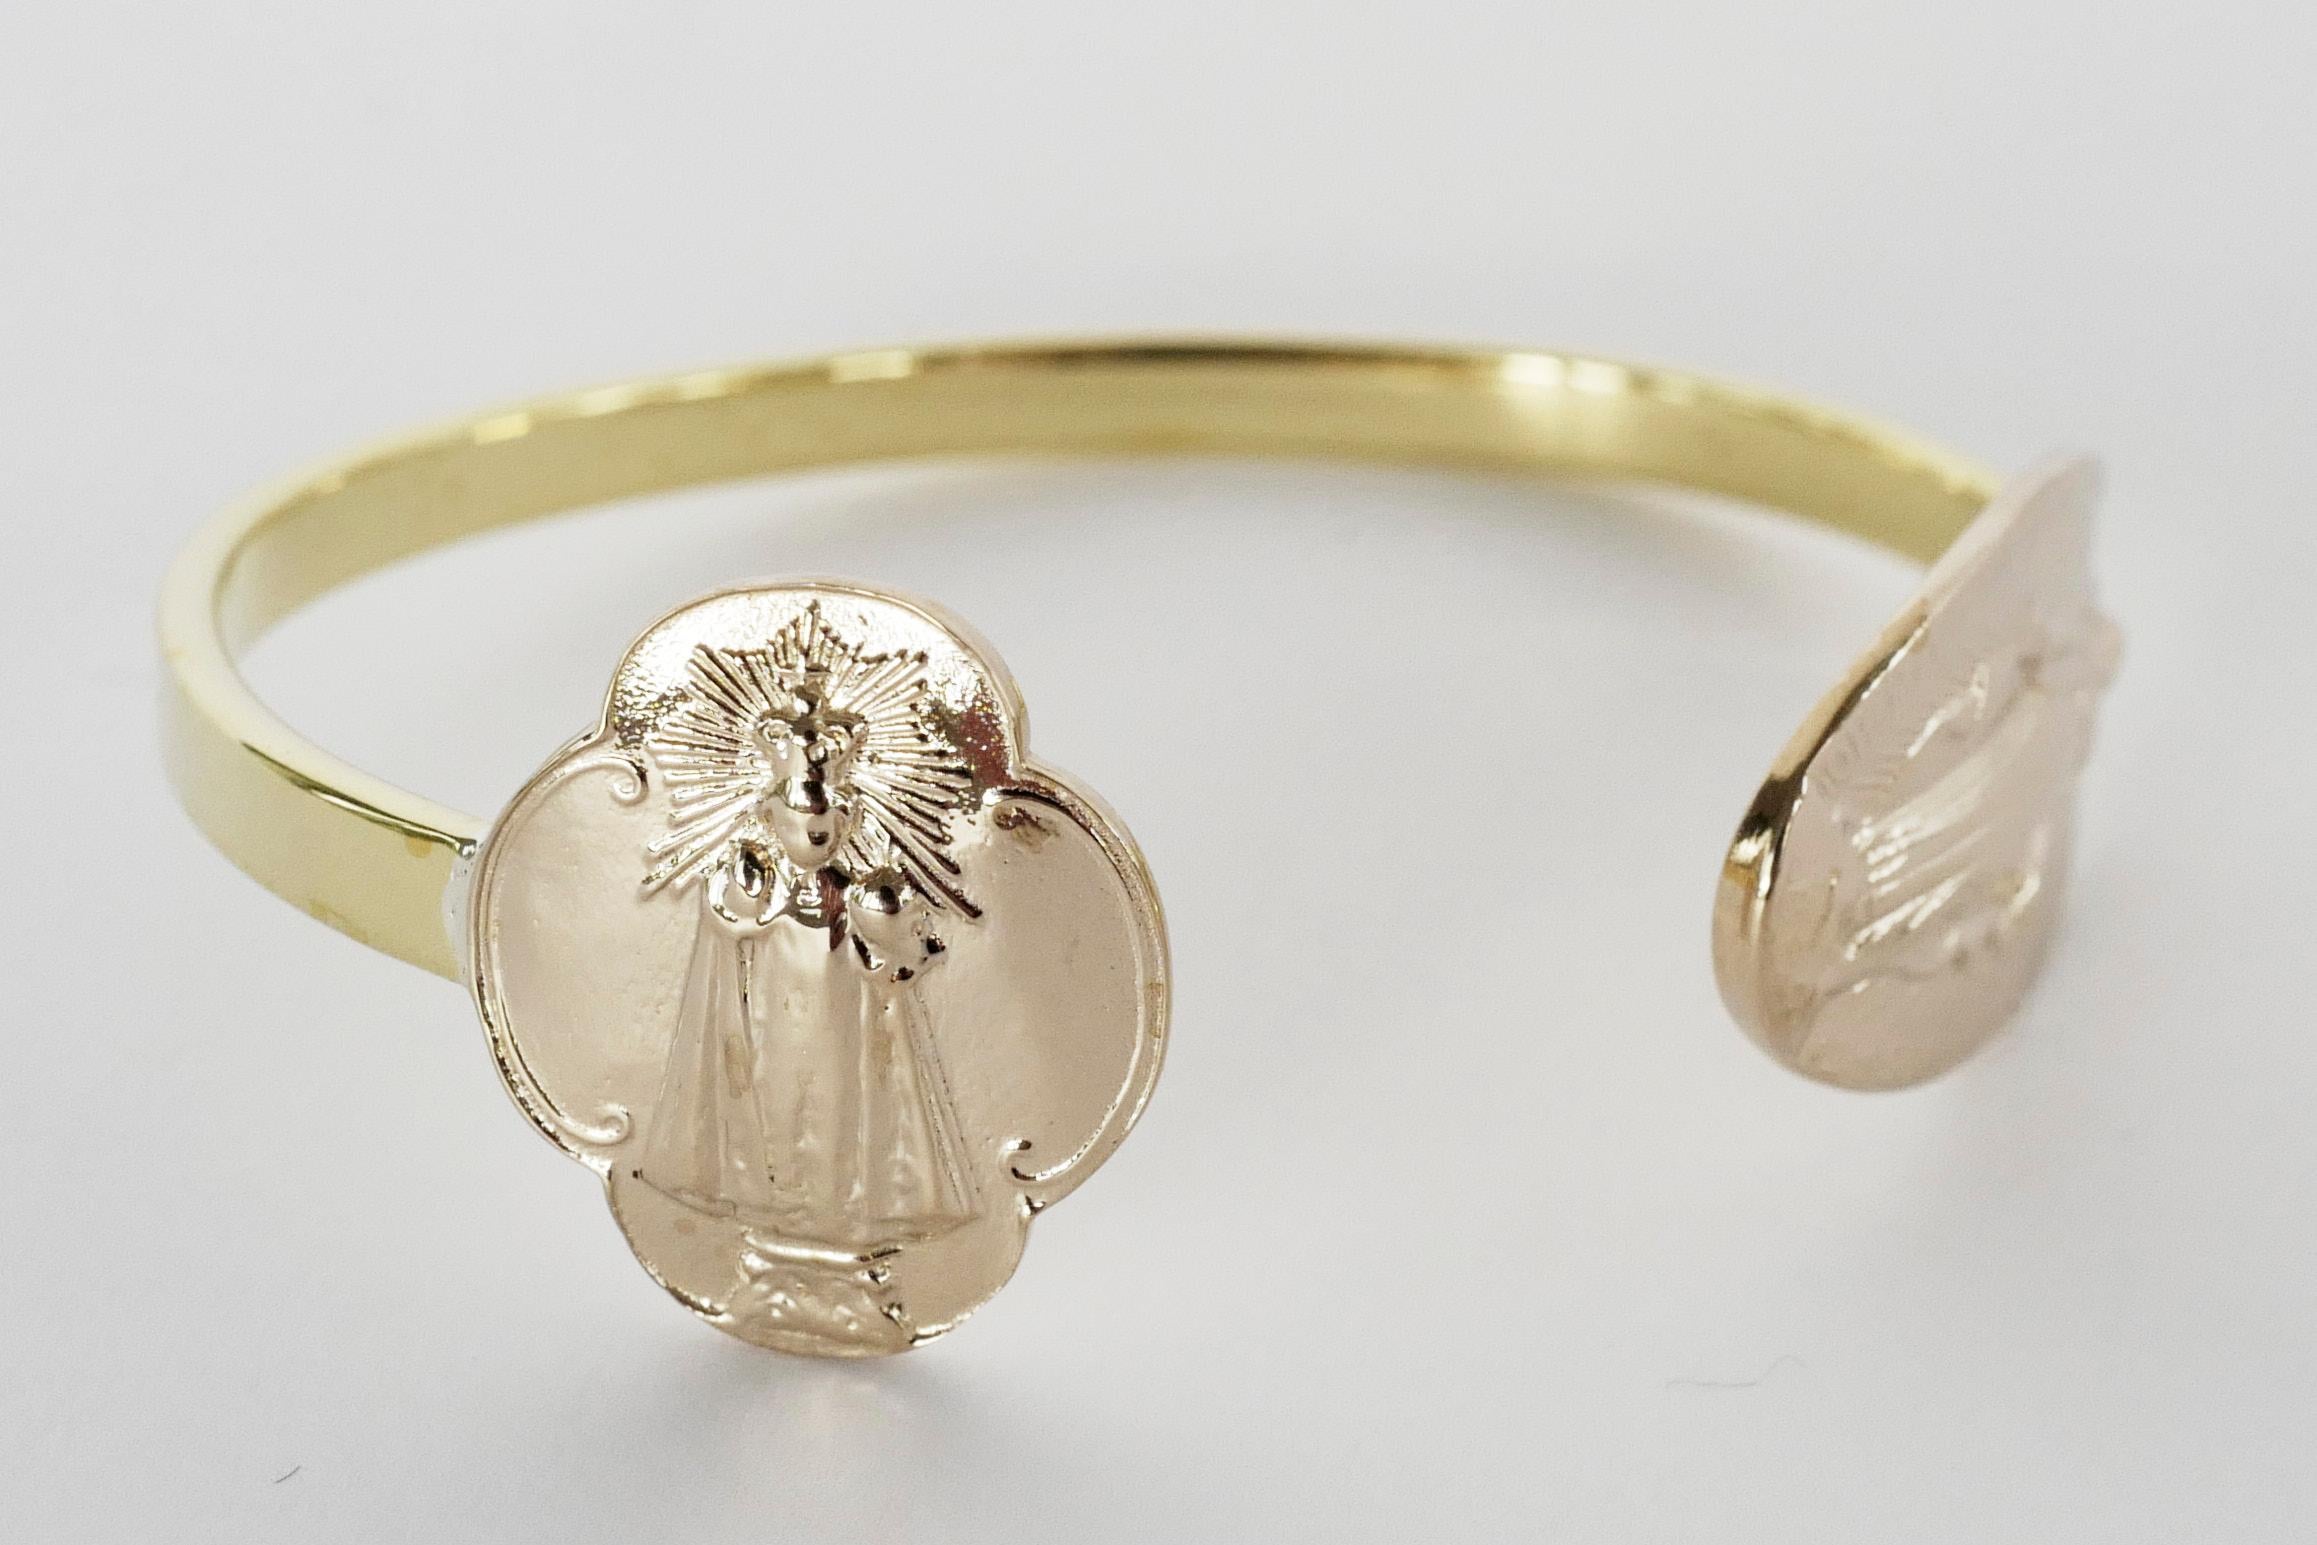 Virgin Mary Medal Bracelet Bangle Cuff Bronze Brass J Dauphin

Symbols or medals can become a powerful tool in our arsenal for the spiritual. 
Since ancient times spiritual pendants, religious medals has been used to protect us. During challenging